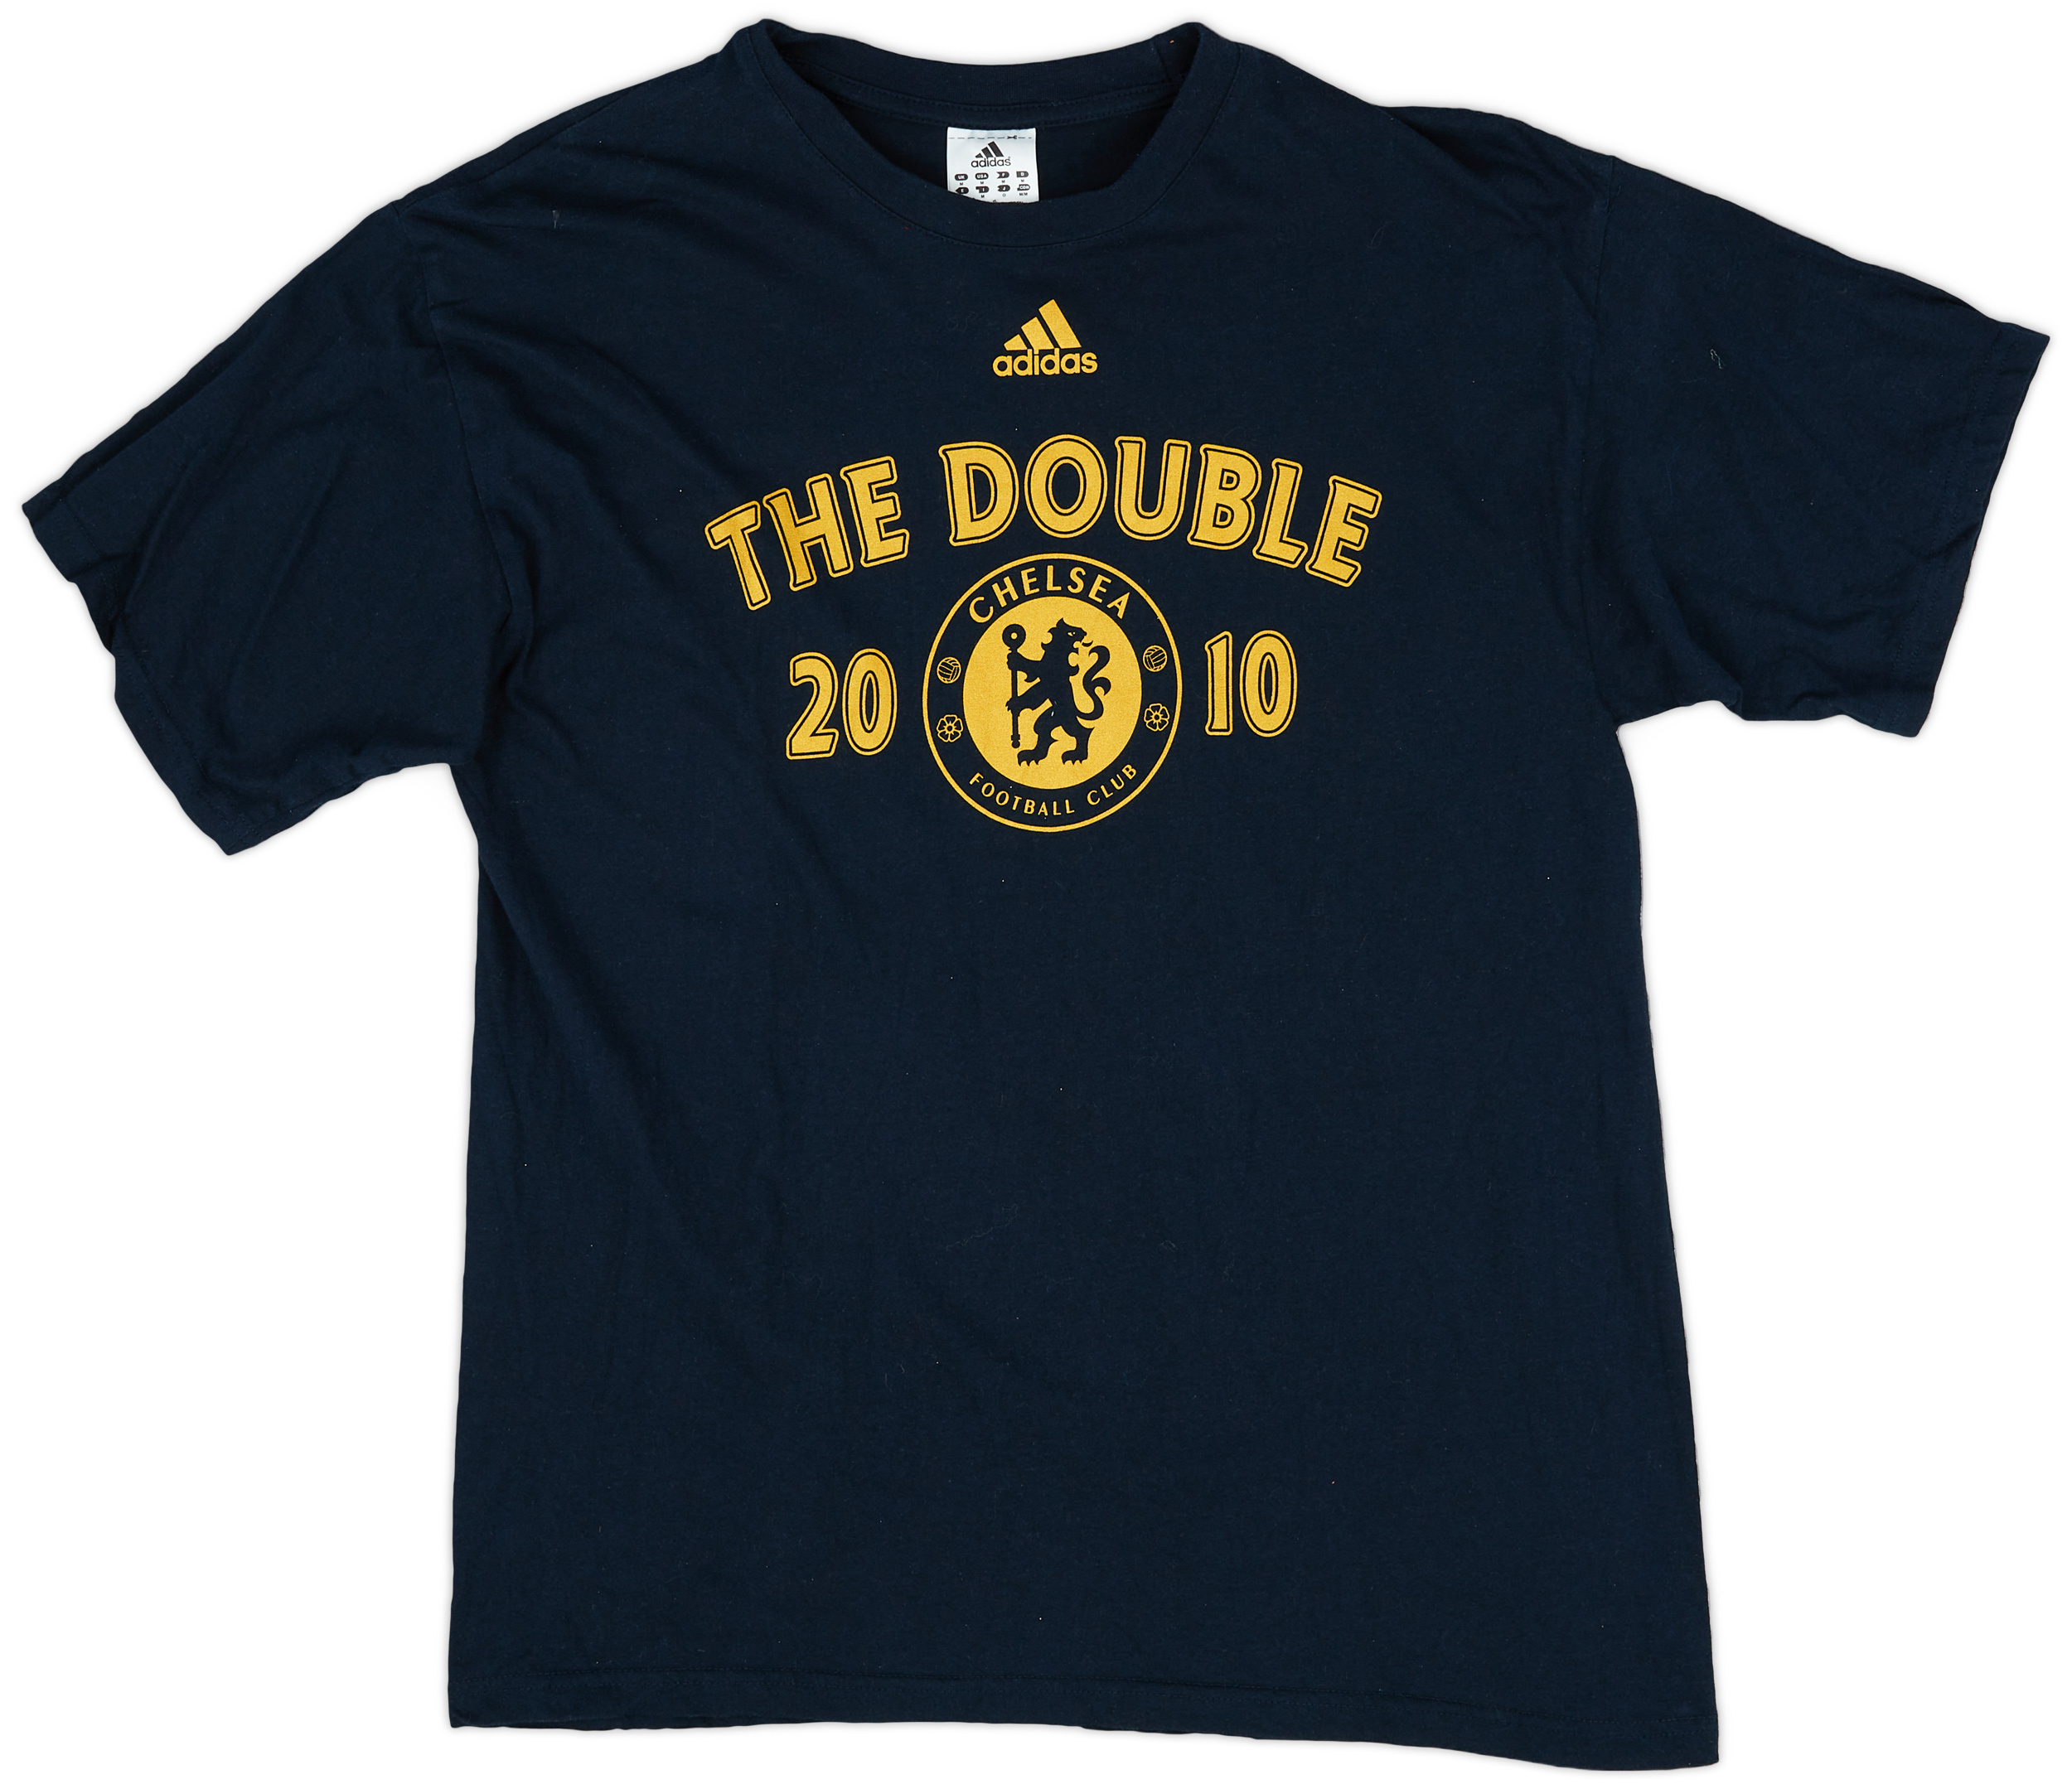 2010-11 Chelsea adidas 'The Double' Graphic Shirt - 8/10 - ()